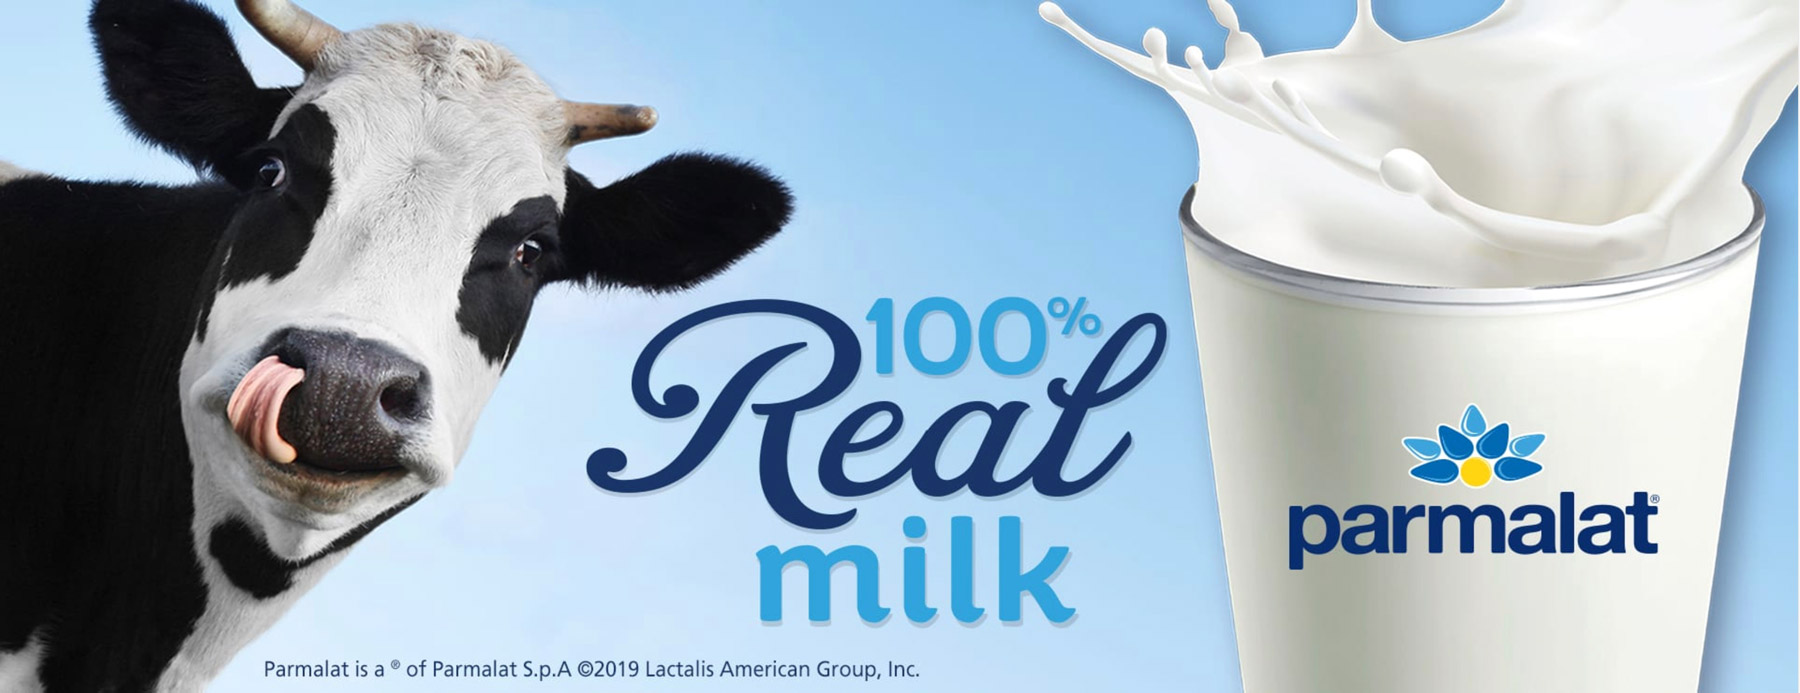 Parmalat milk advertisement featuring happy smiling cow and milk dropping into glass